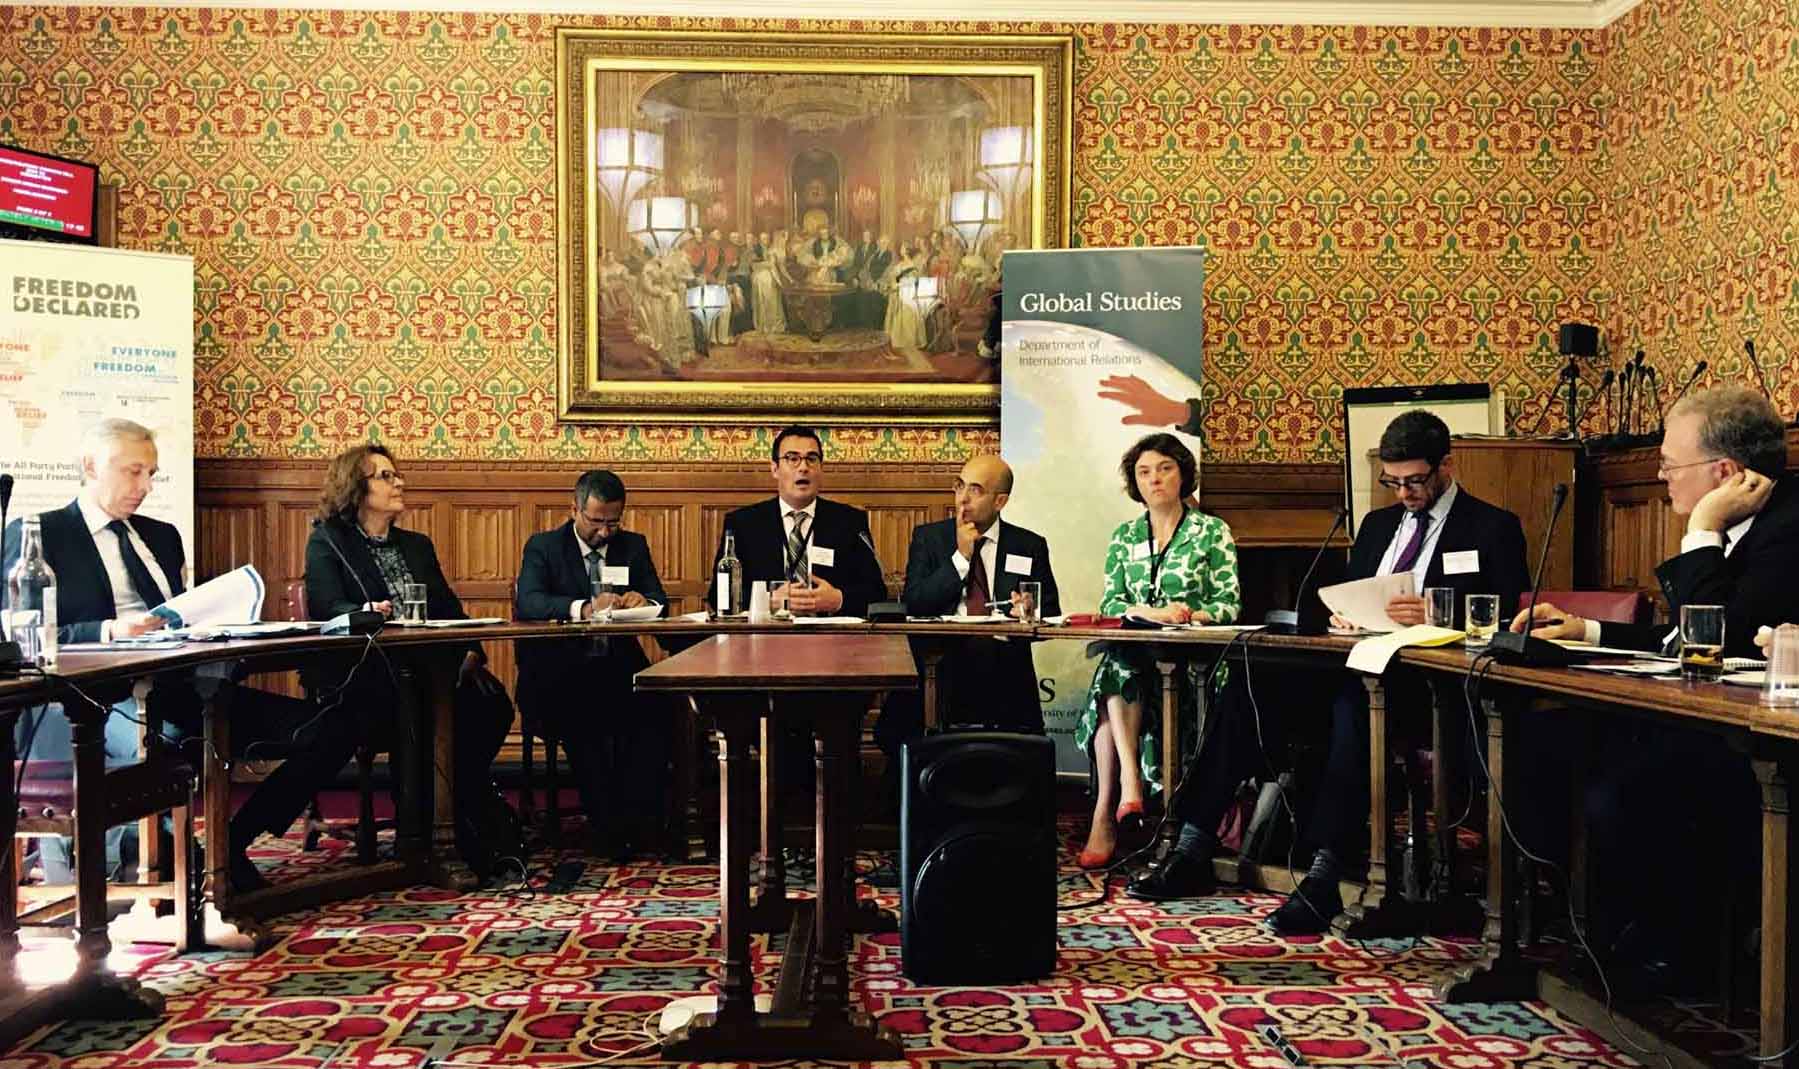 Image for Professors Durham and Scharffs participate in FoRB Policy Dialogue at the House of Lords, London, 7 September 2016